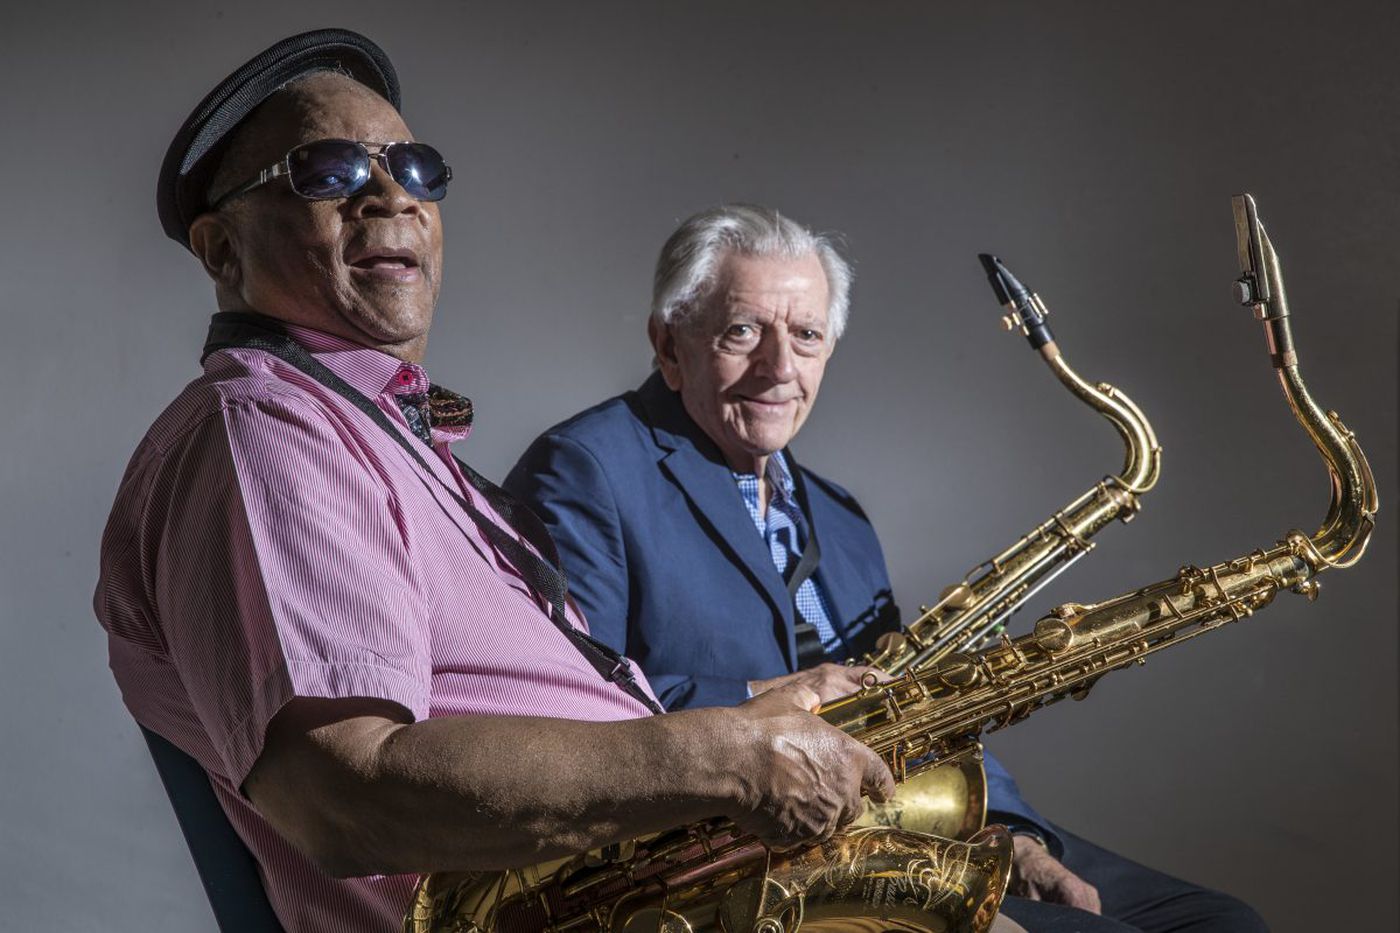 Late local legendary tenorman Bootsie Barnes (left) will be paid tribute by friend Larry McKenna at Chris’ Jazz Café, with the John Swana Quartet.